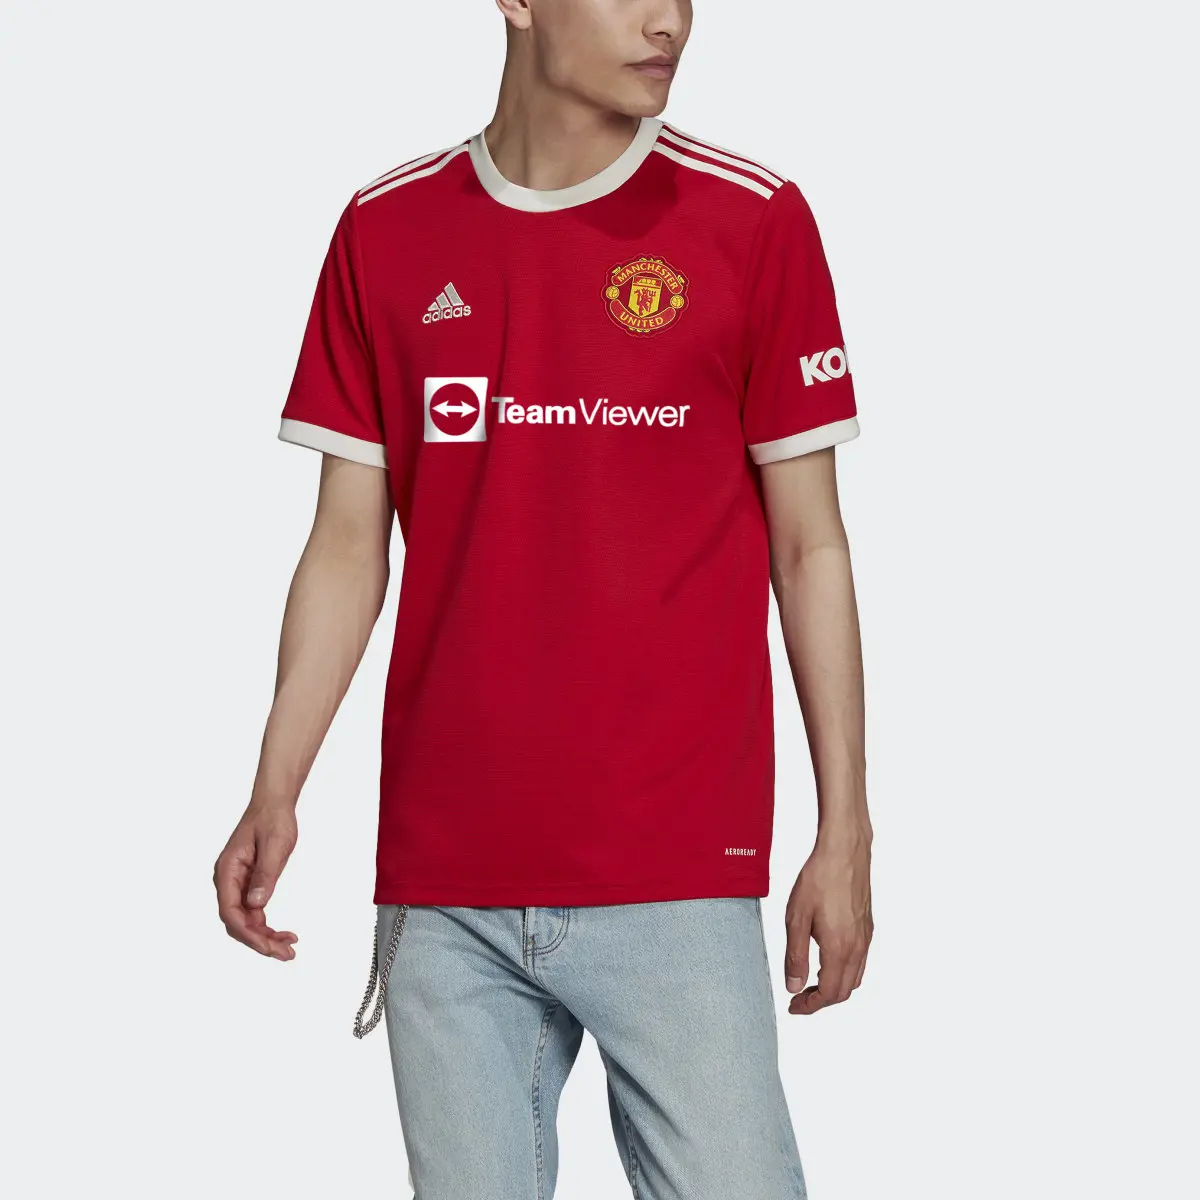 Adidas Maillot Domicile Manchester United 21/22. 1